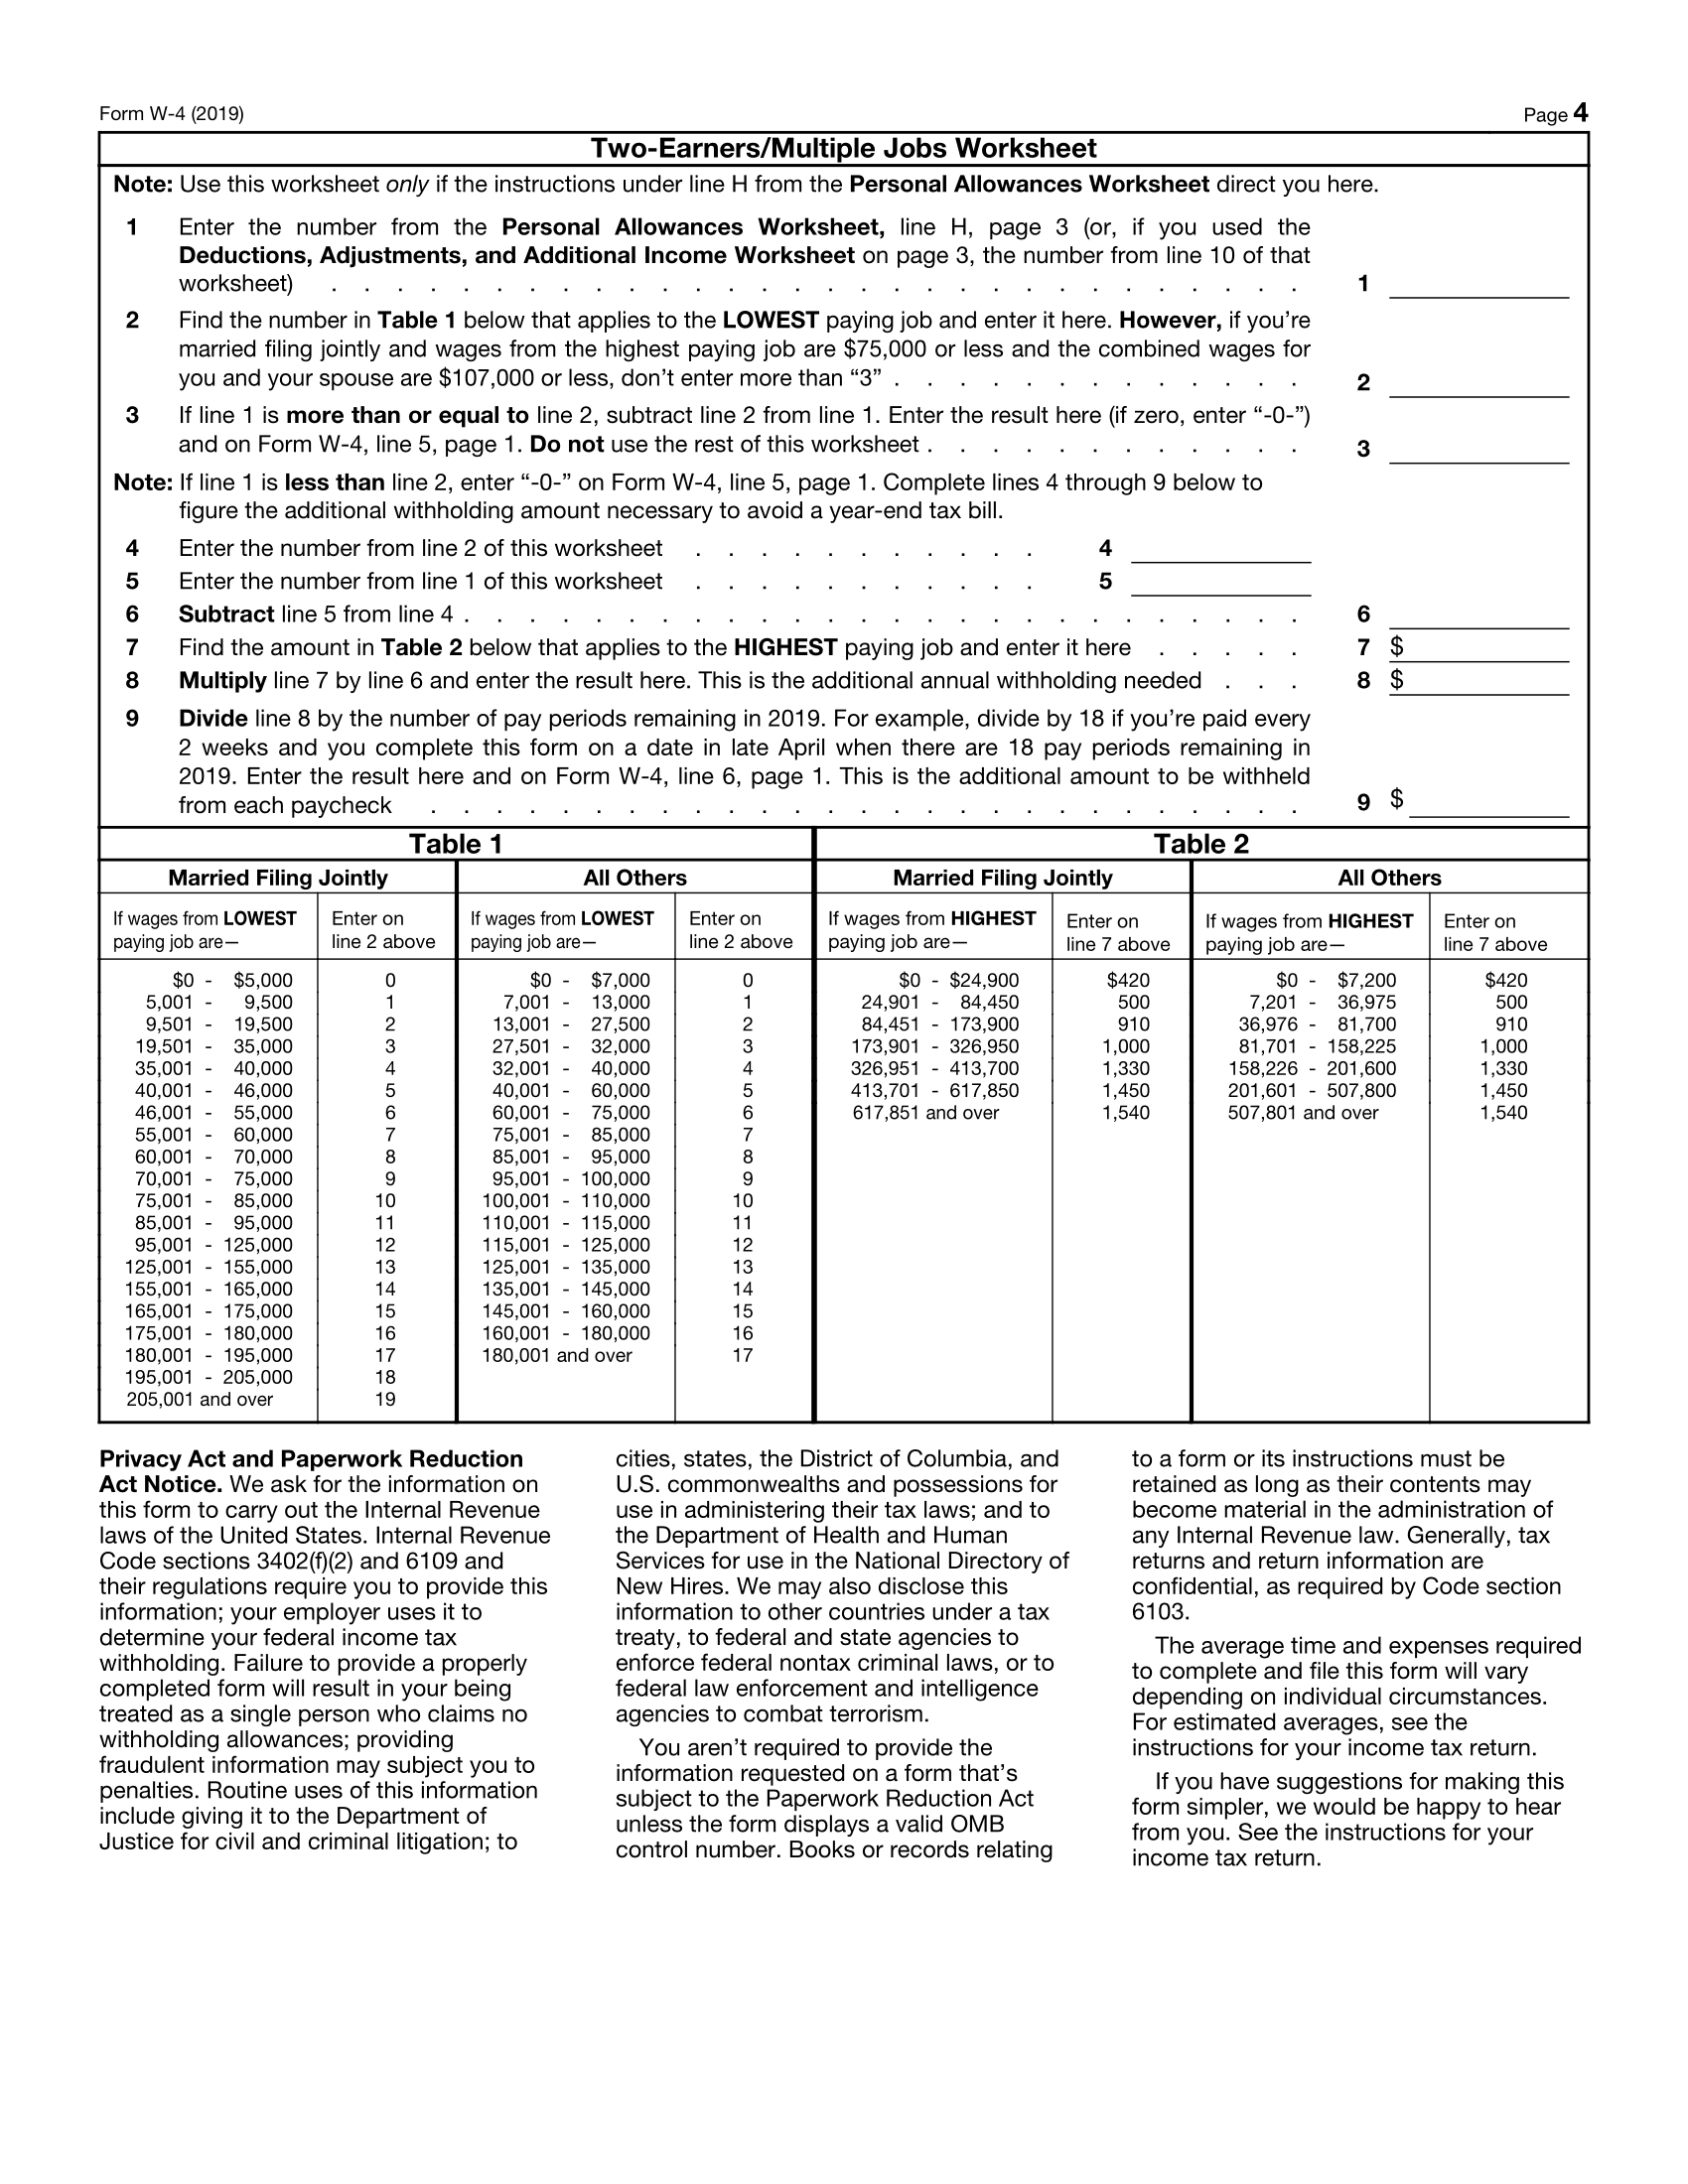 Form W-4 Page 4